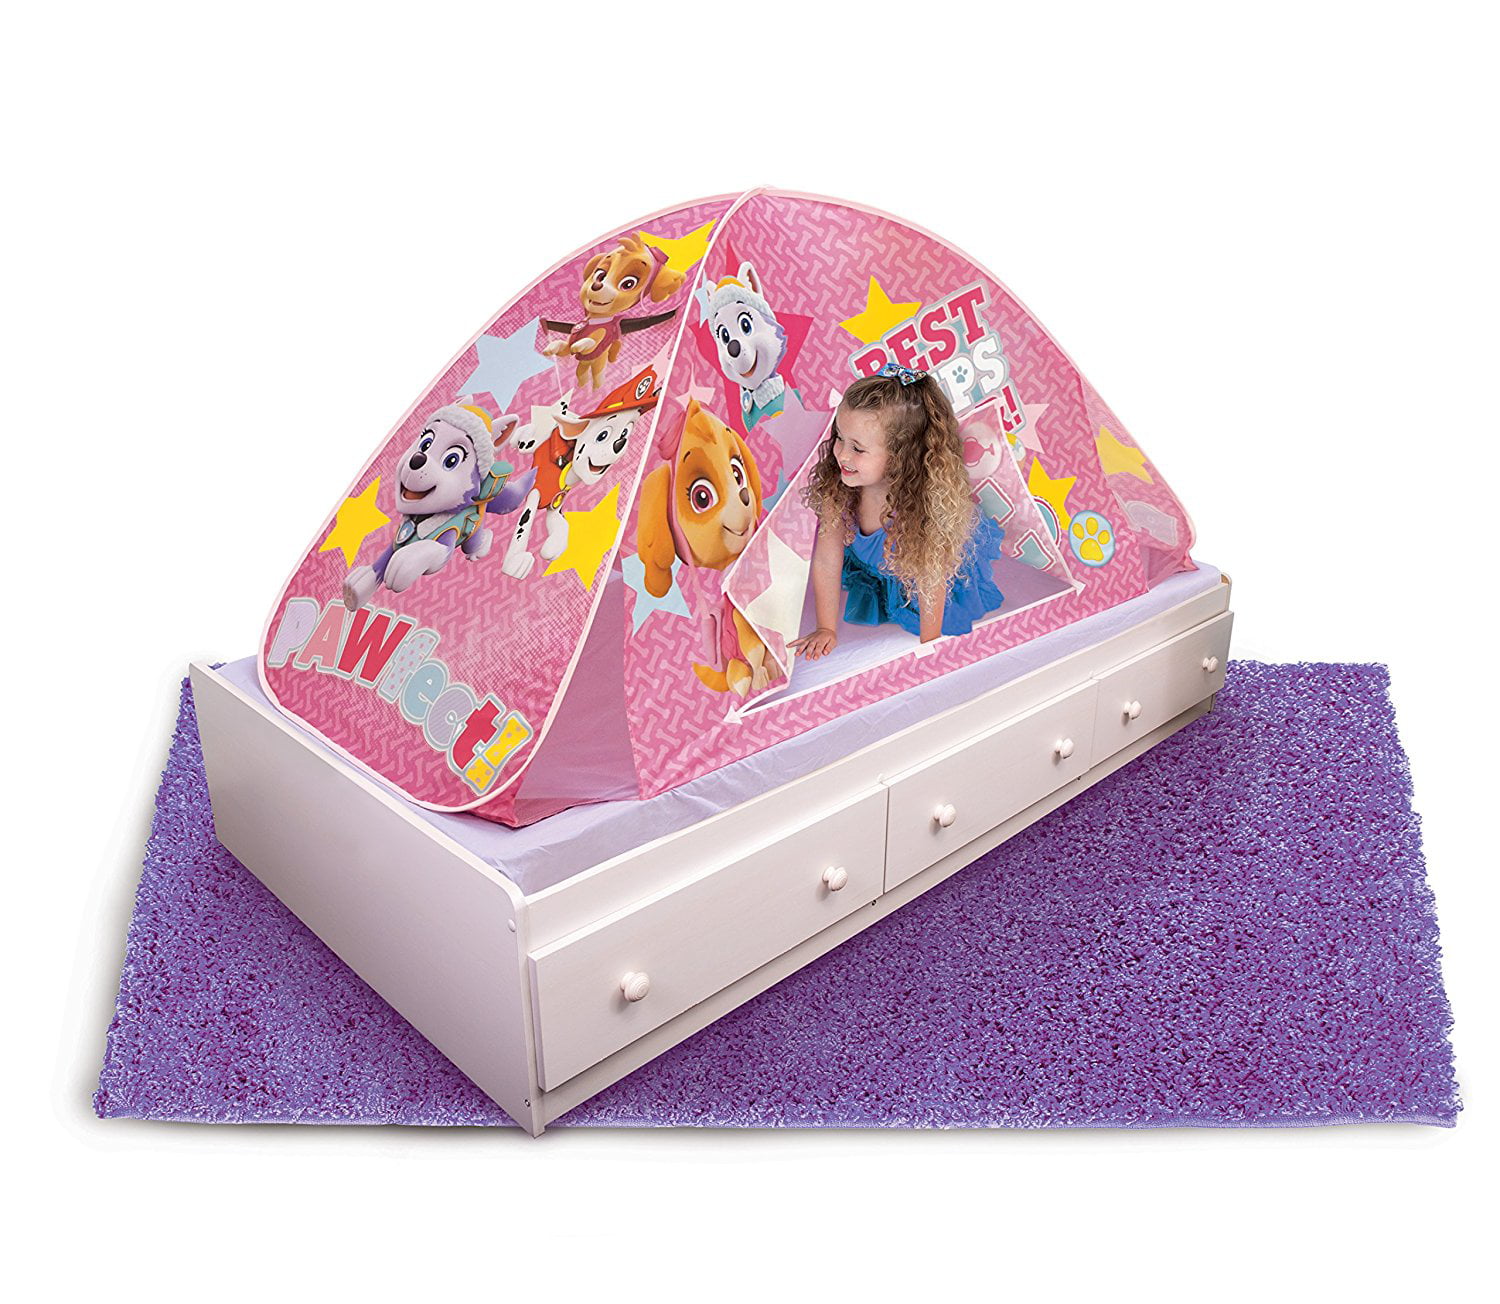 Playhut Paw Patrol 2-in-1 Bed Tent Playhouse